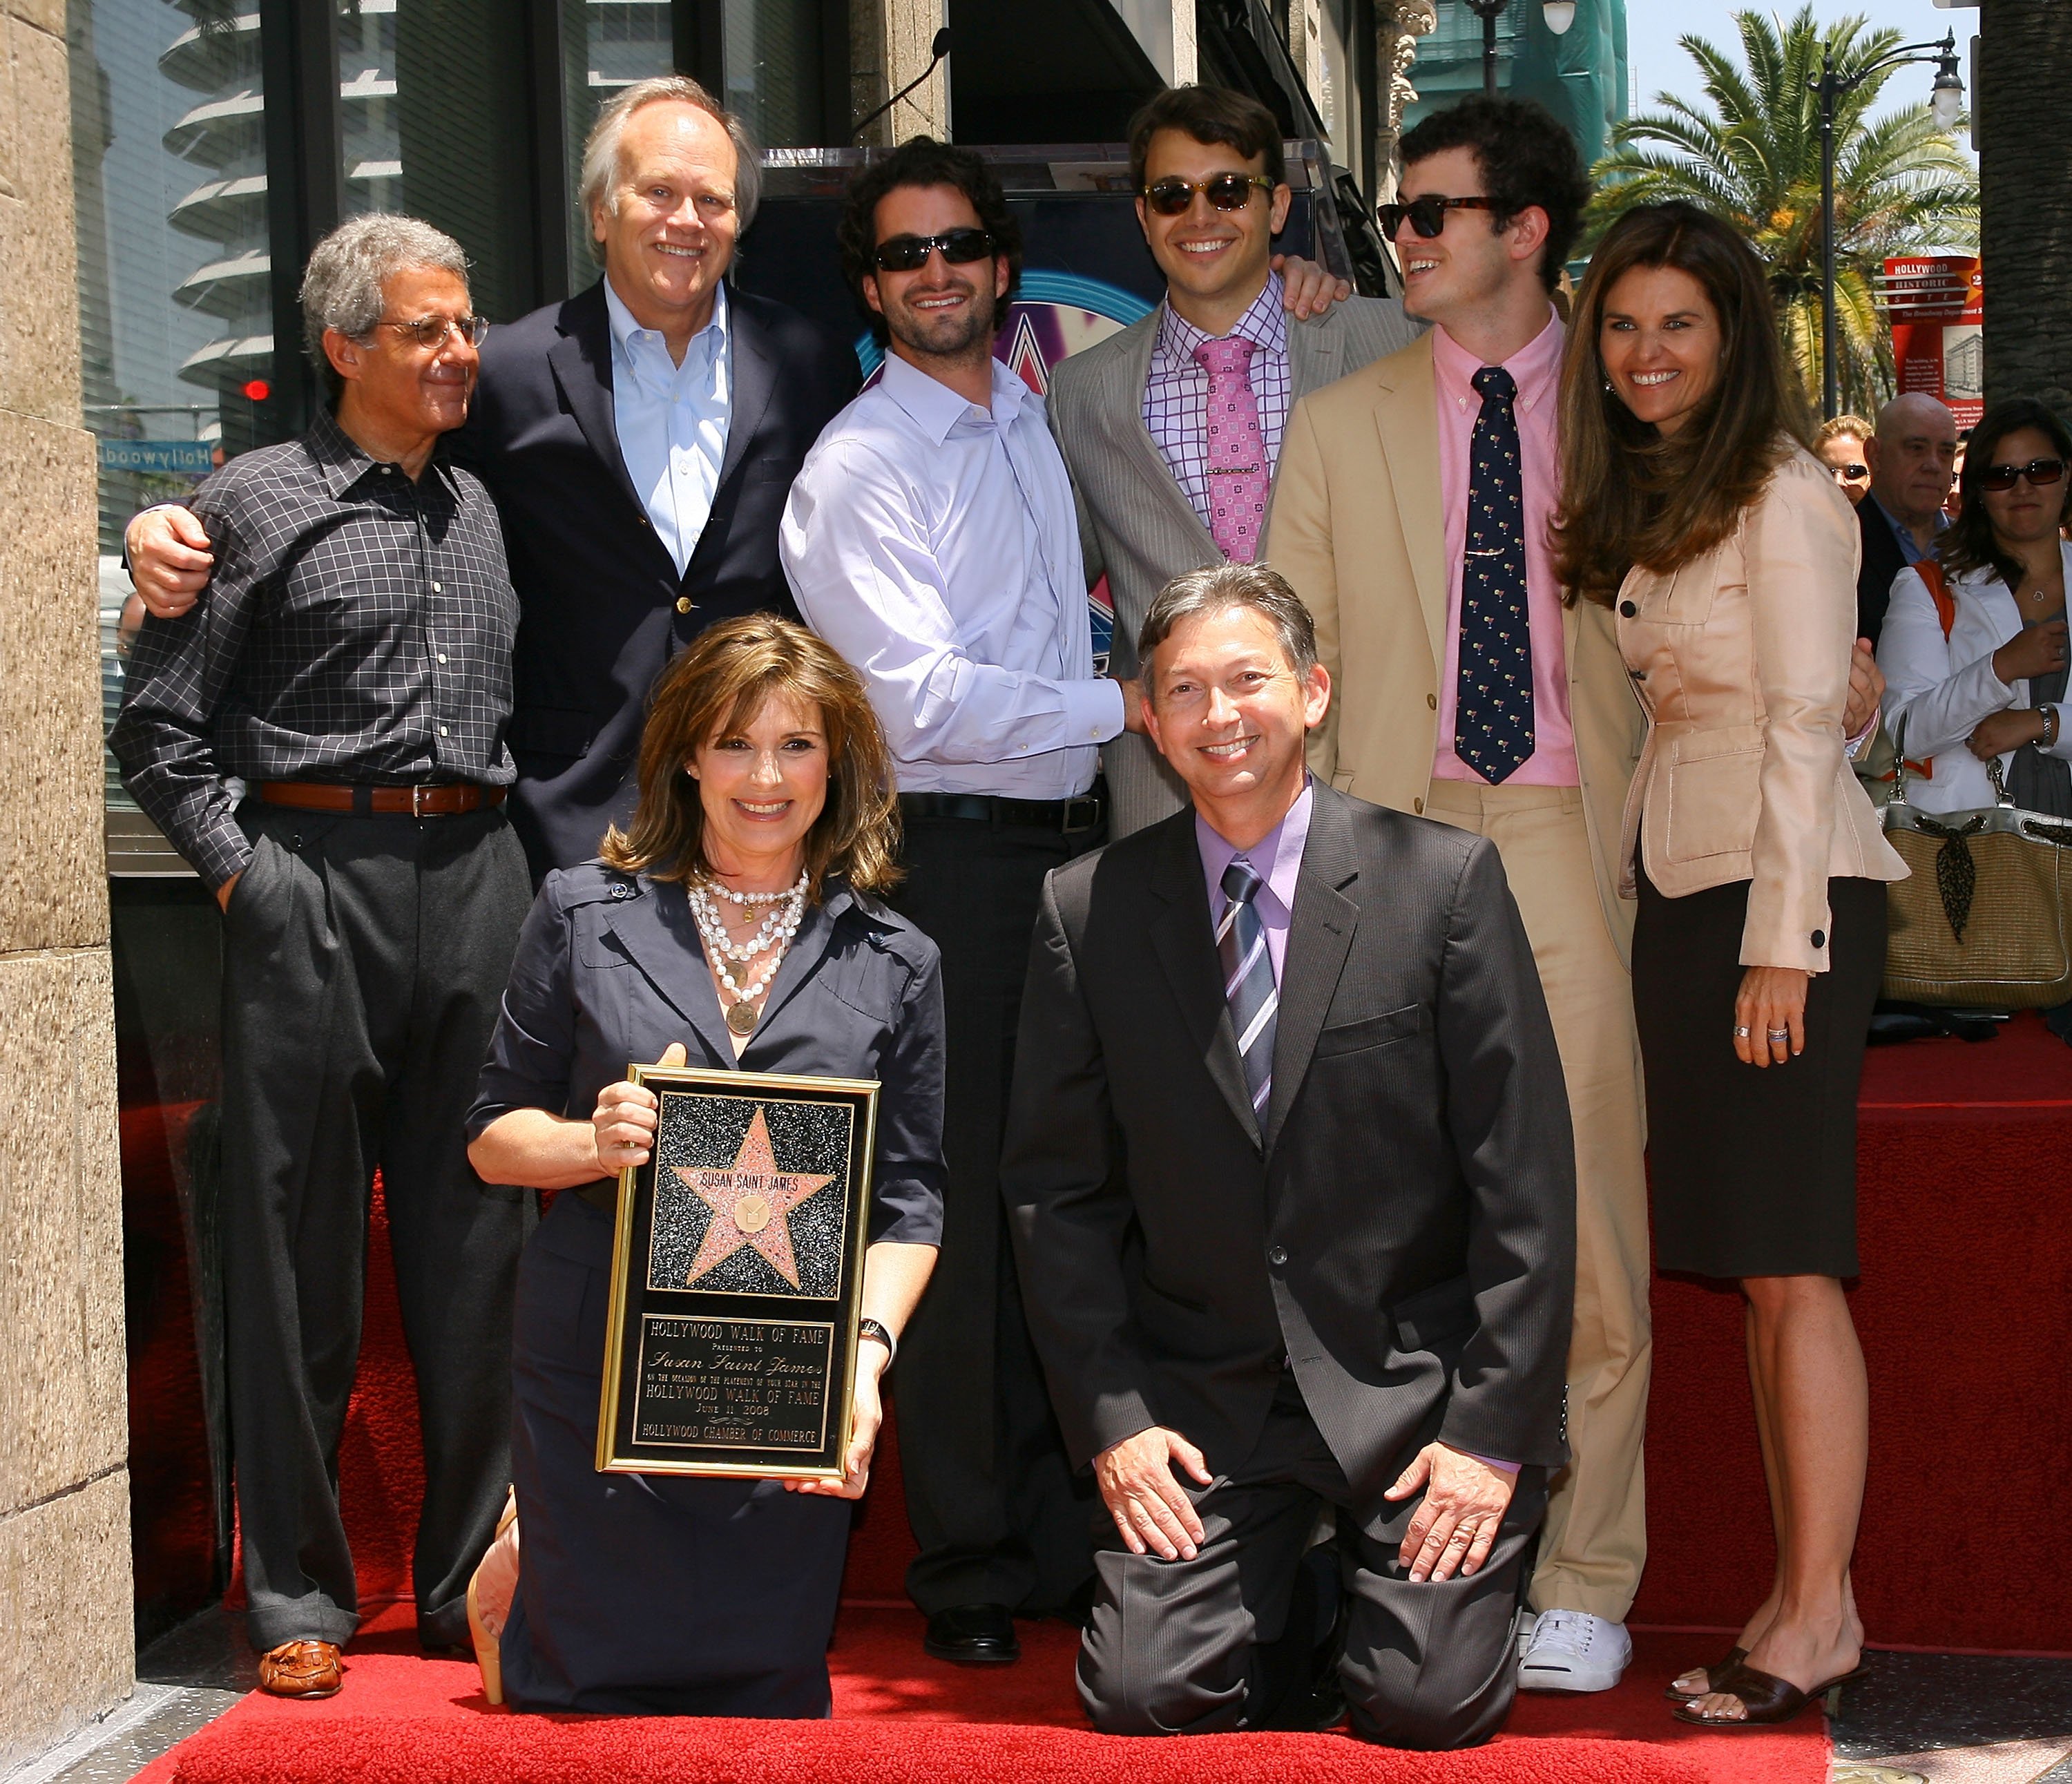 (L-R) Universal Studios' Ron Meyer, Dick Ebersol, Harmony Ebersol, Charles Ebersol, William Ebersol, First Lady of California Maria Shriver, Susan Saint James and President of the Hollywood Chamber of Commerce Leron Gubler attend the Star on Hollywood Walk of Fame honoring actress Susan Saint James near the intersection of Hollywood Boulevard and Vine Street on June 11, 2008 in Hollywood, California. Photo: Getty Images